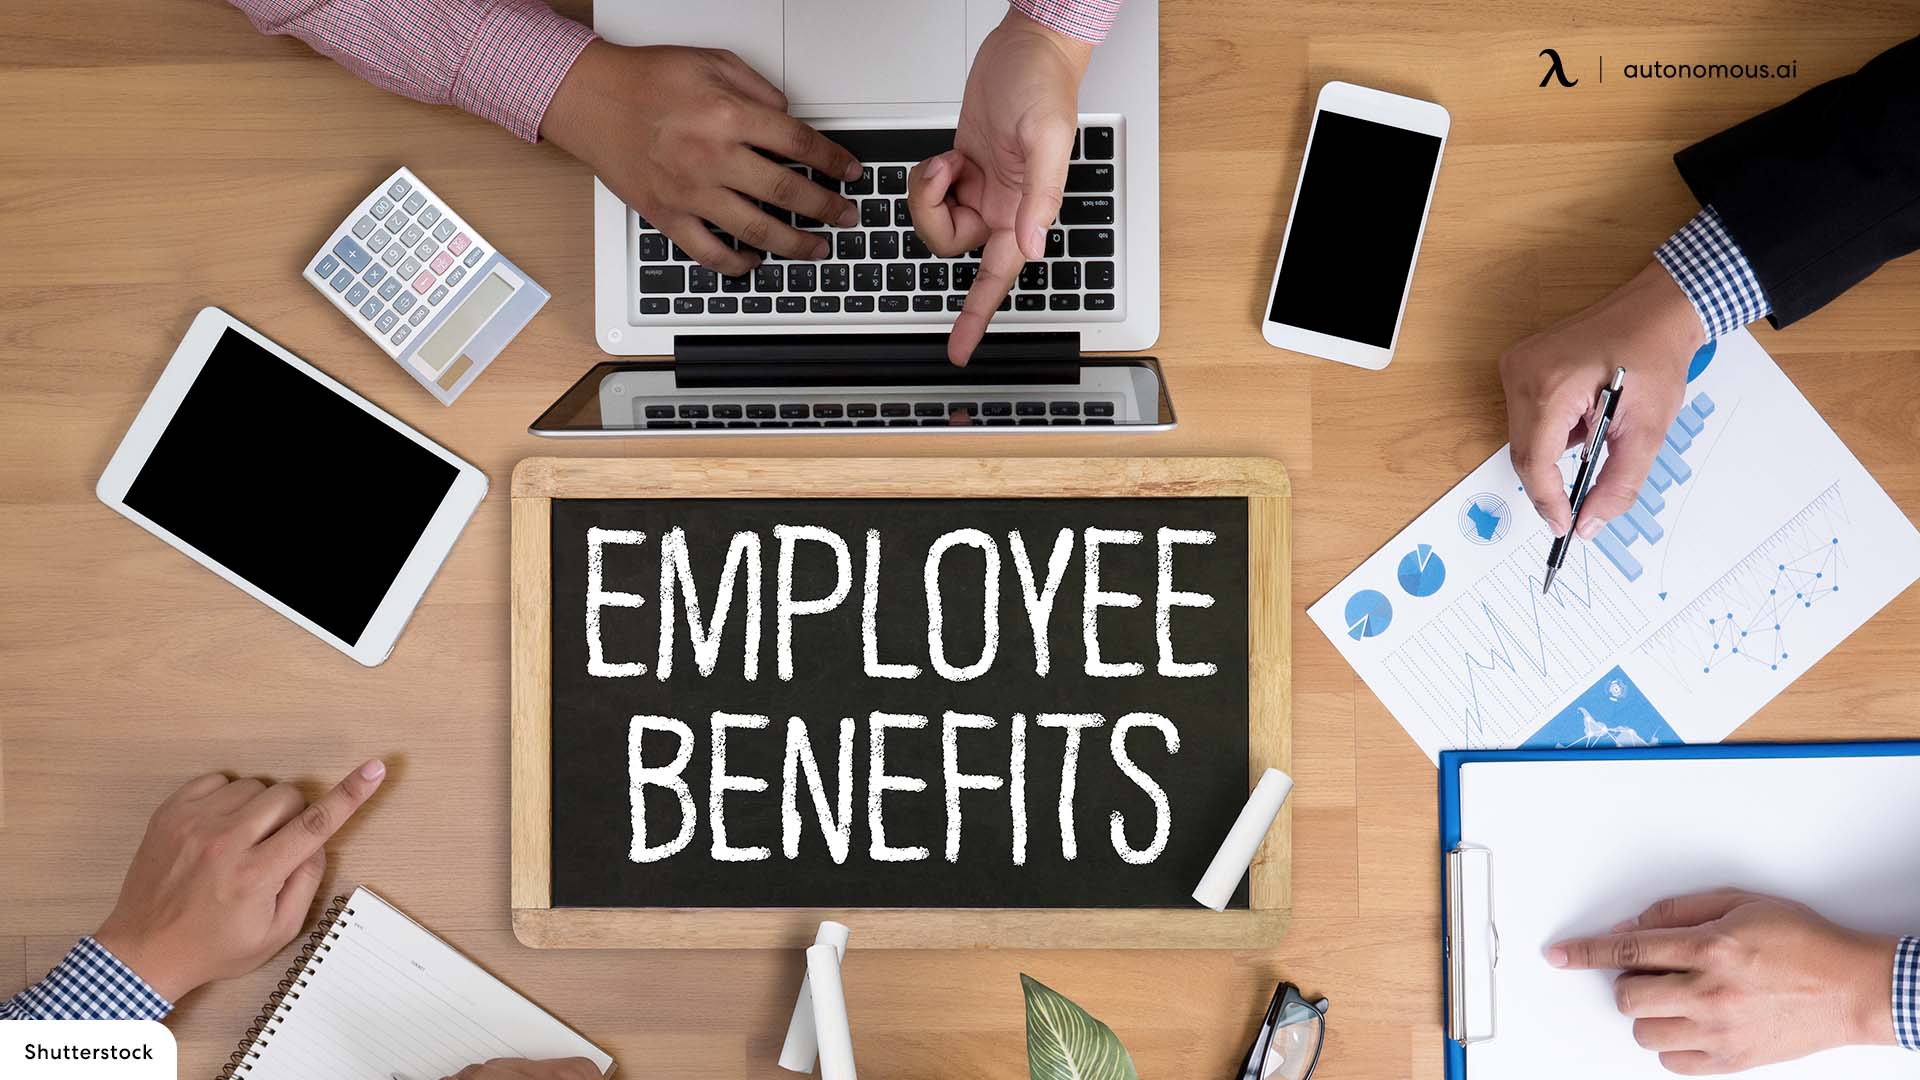 NVIDIA Employee Benefits and Perks for Your Career